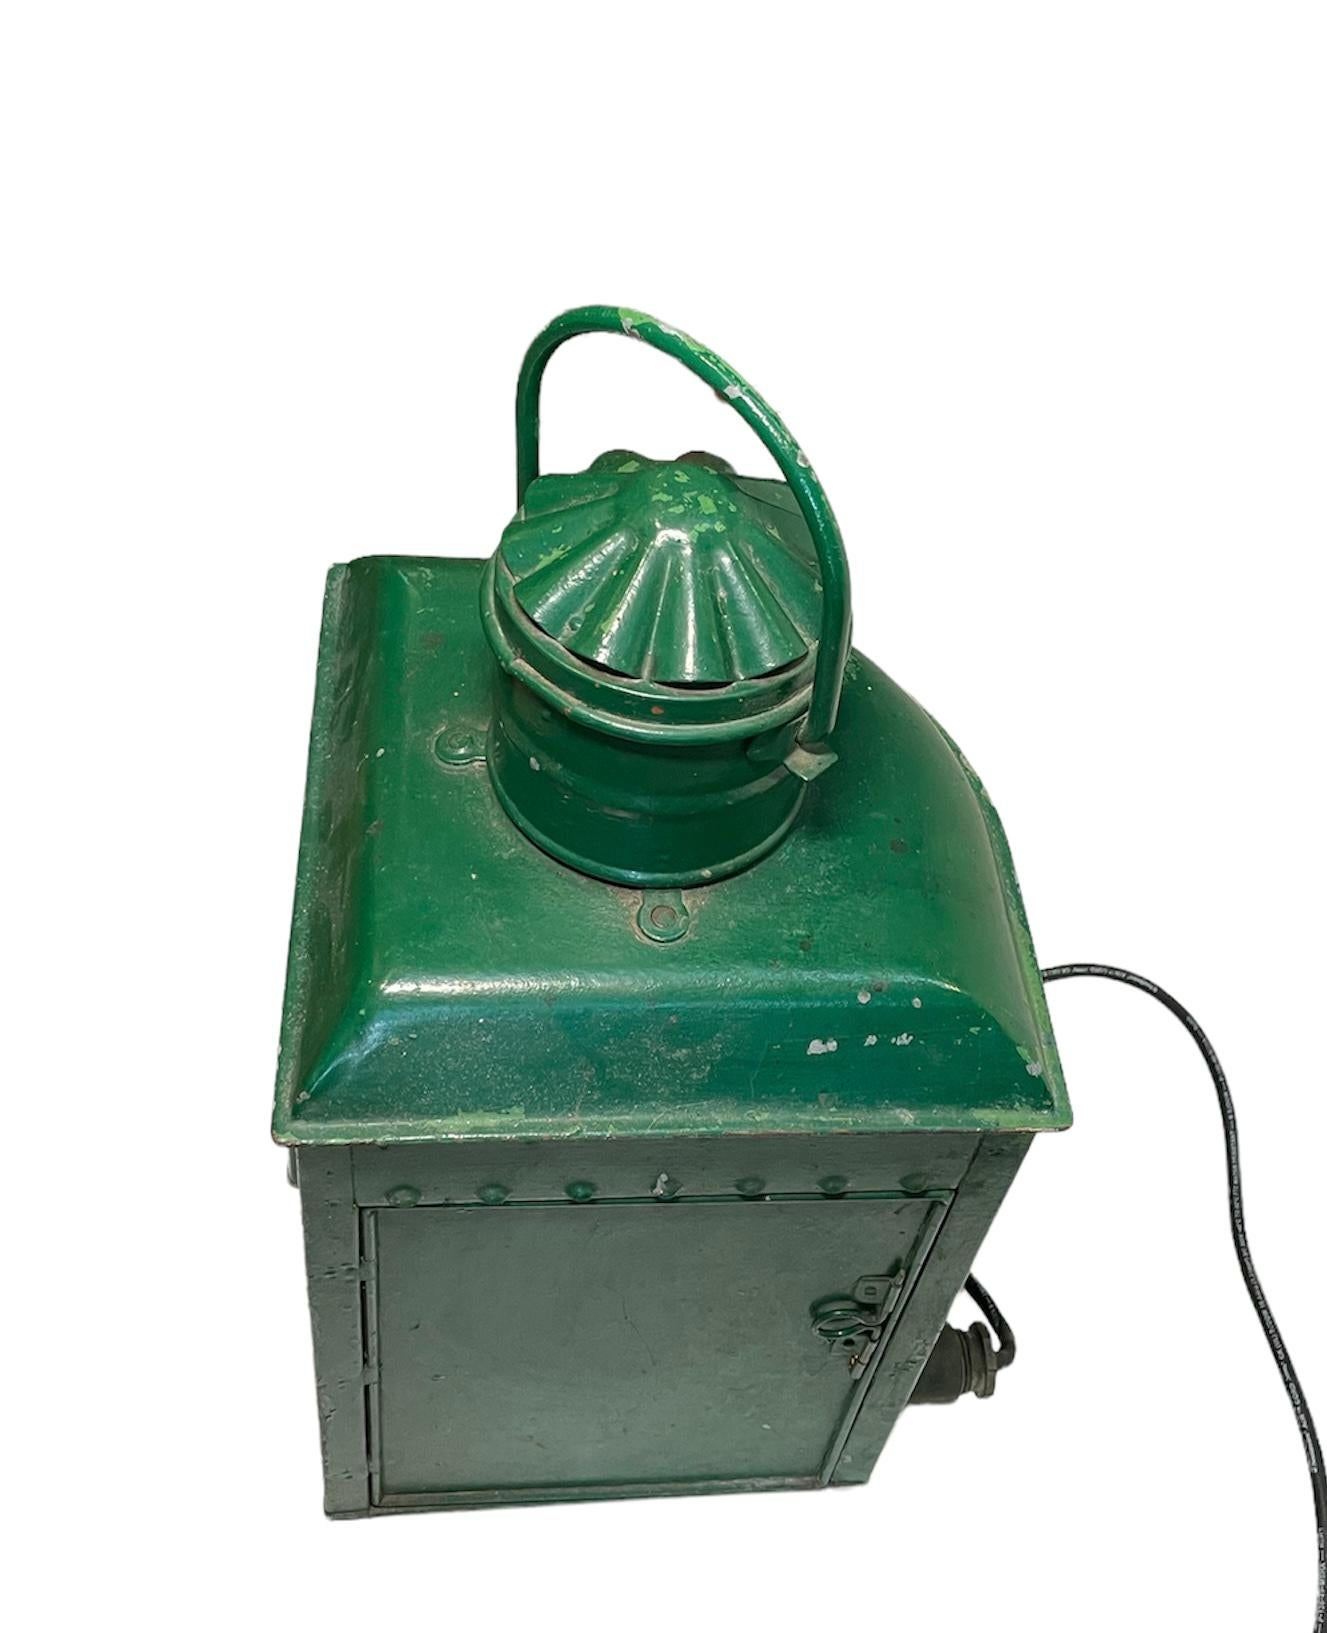 This is a former large oil nautical lantern. It depicts a metal port ship’s lantern painted green with a blue glass shade. It is electrified.